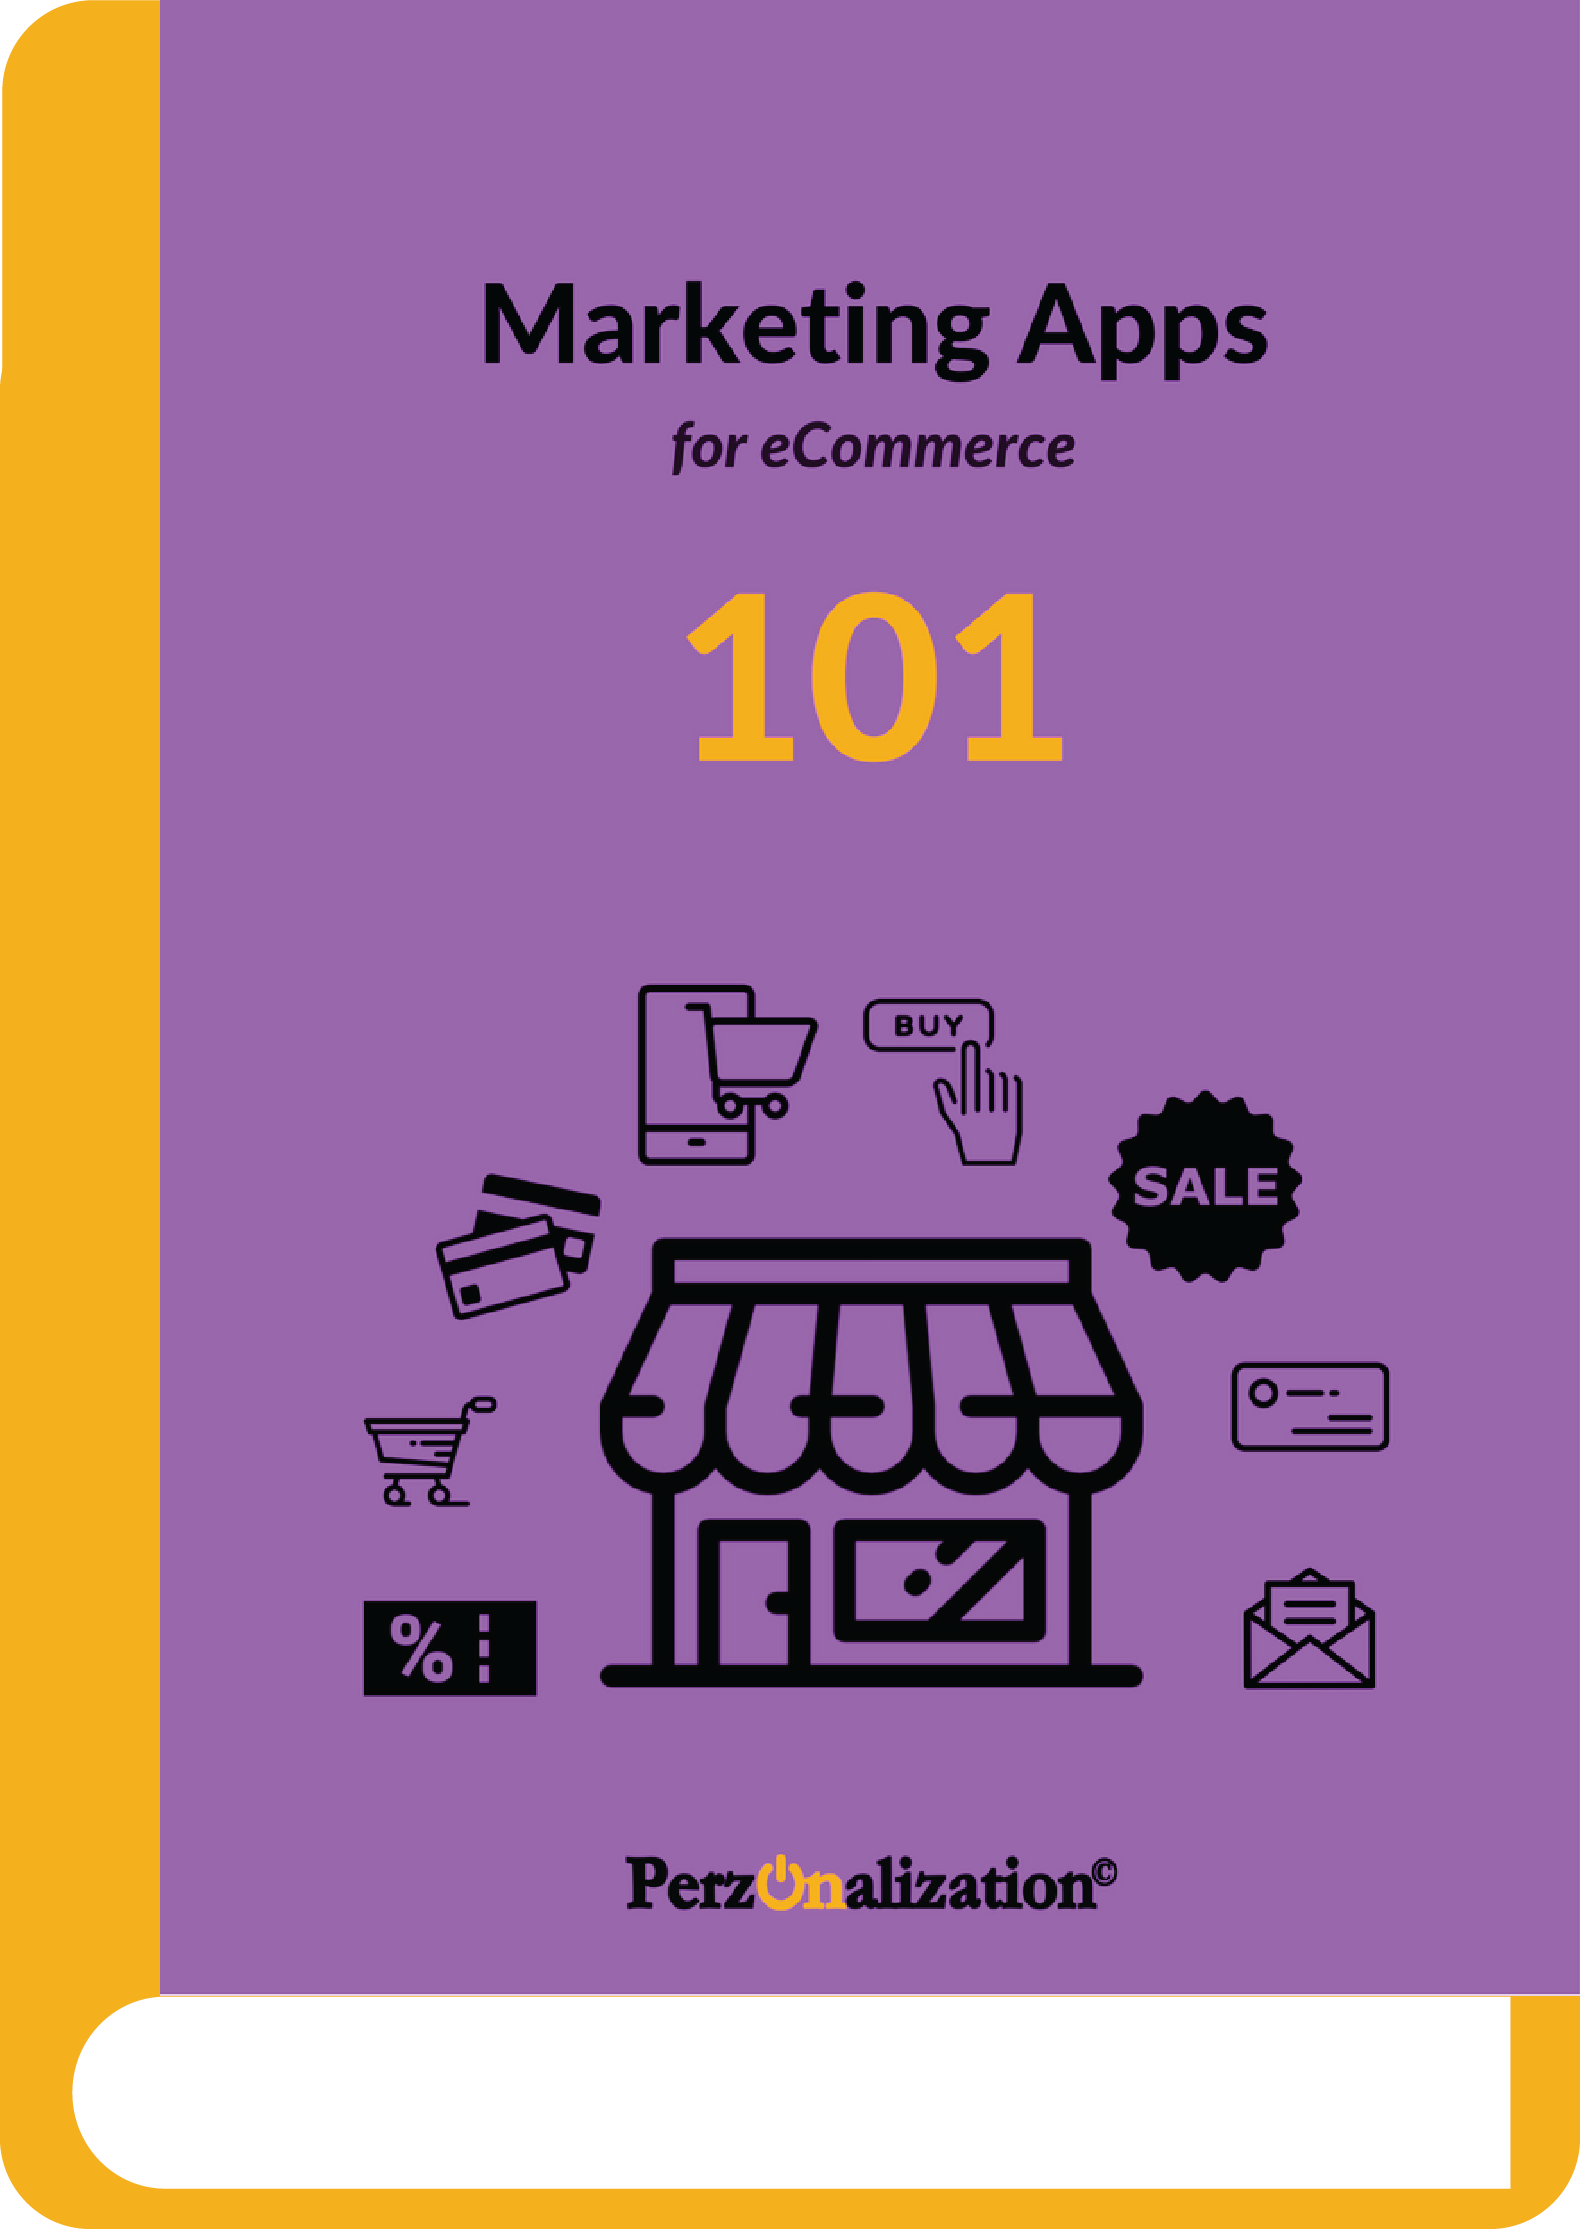 Marketing Apps for eCommerce 101 - an eBook for SMB online stores